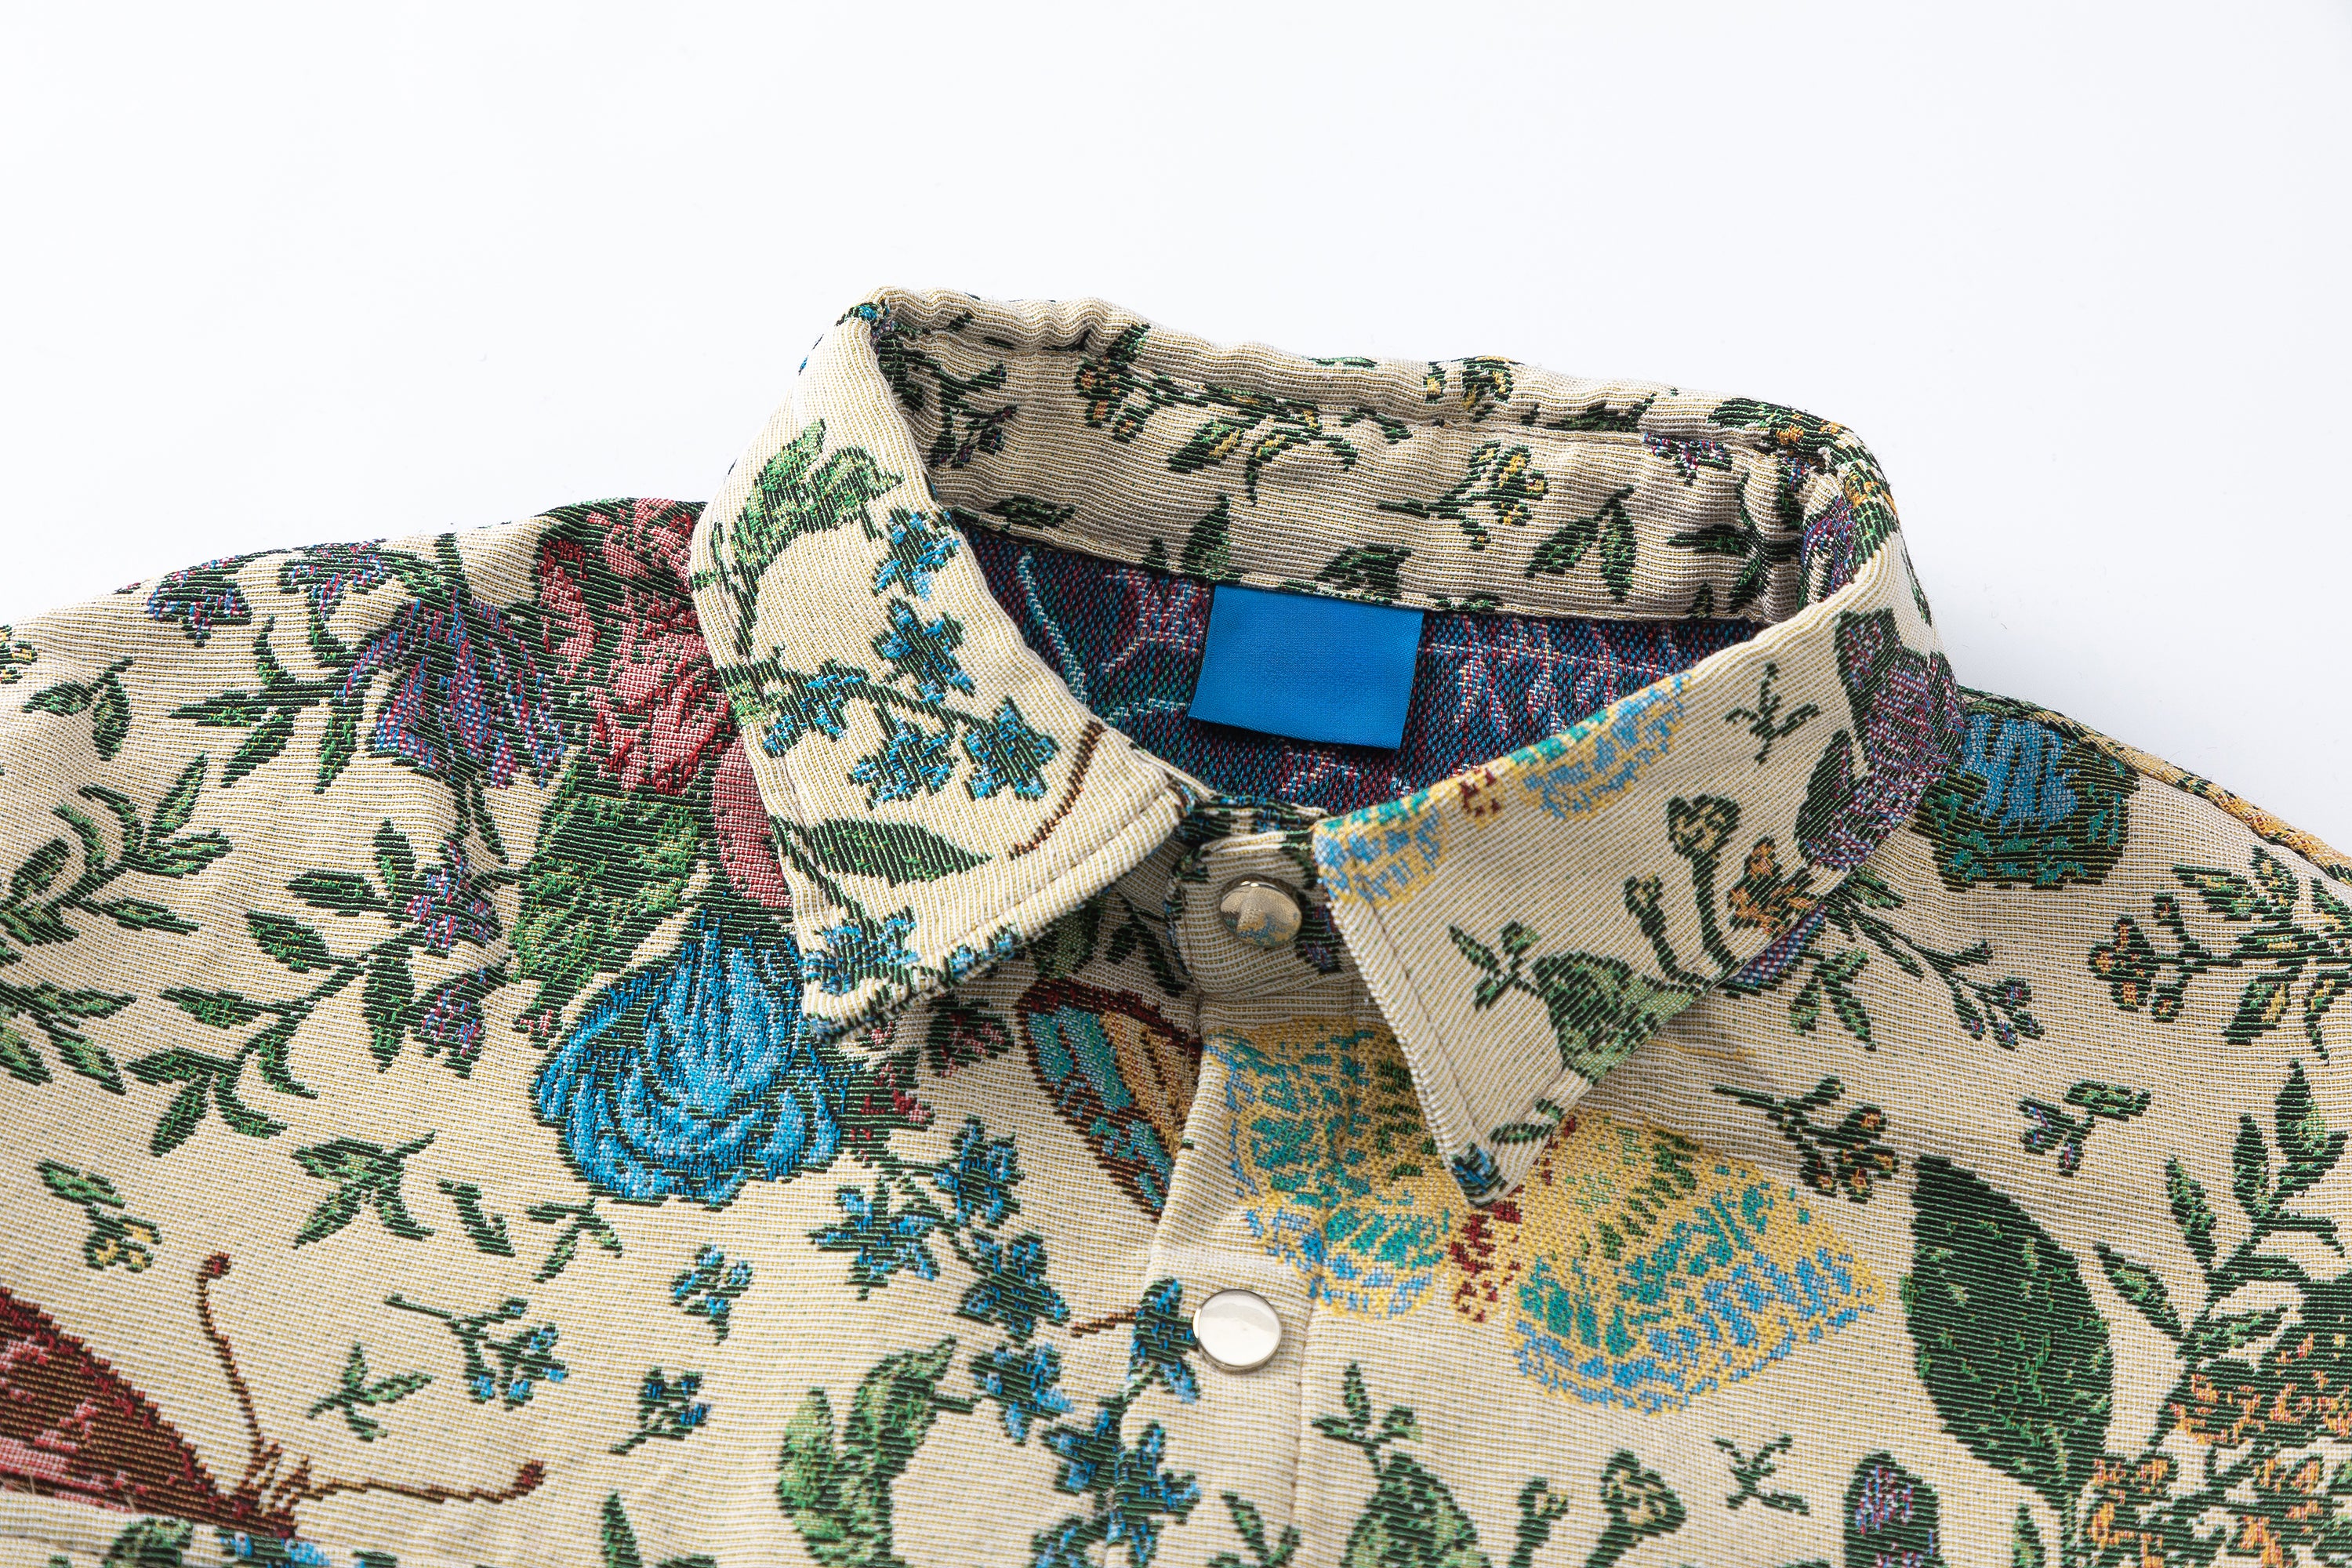 Faire Echo Retro butterfly printed shirt